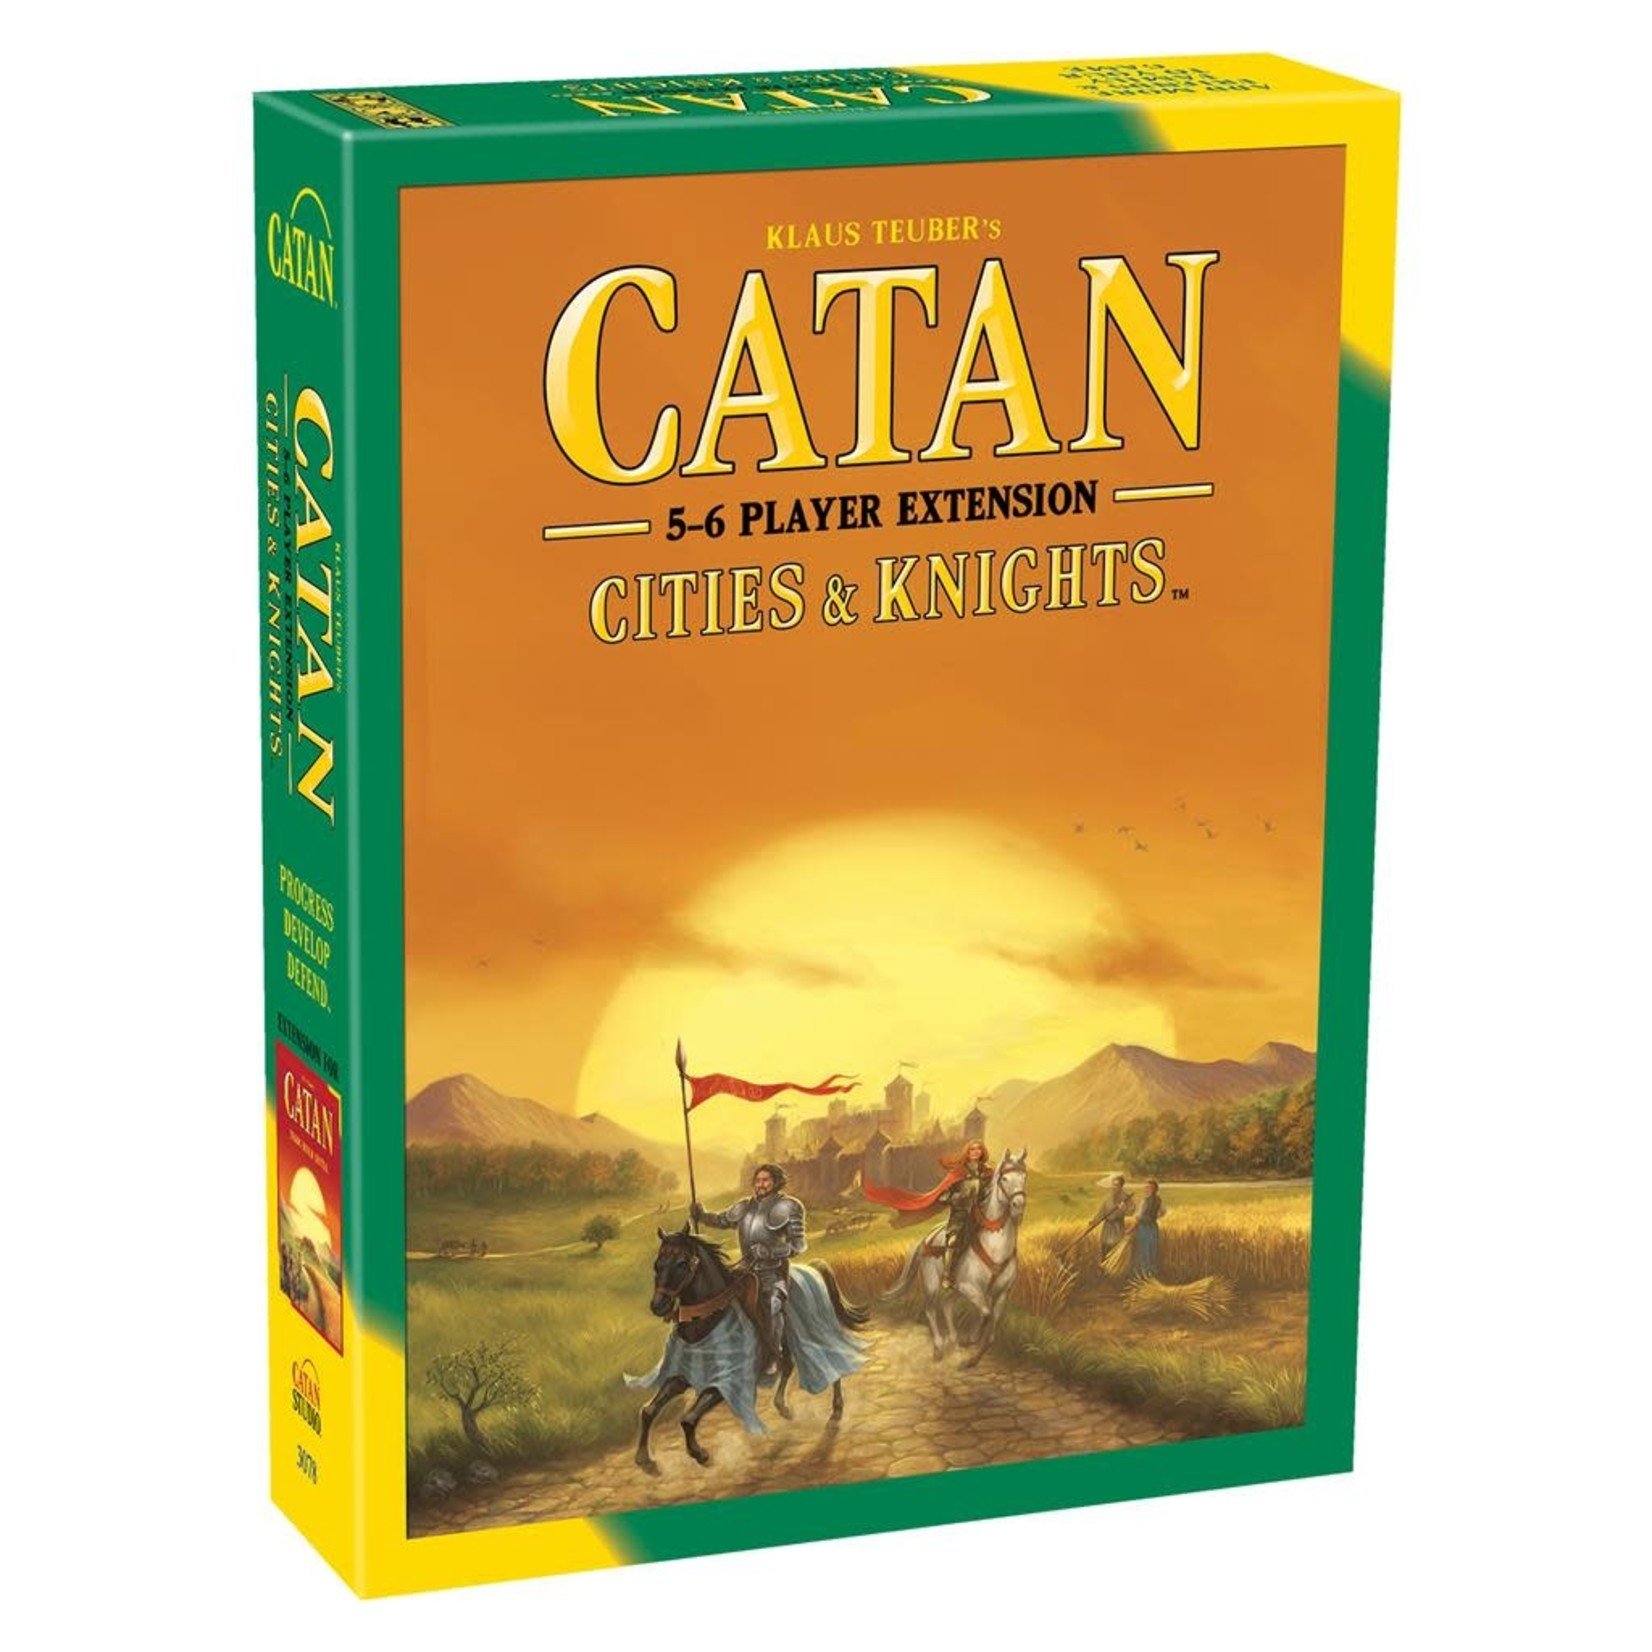 Catan Cities & Knights 5-6 Player  Extension